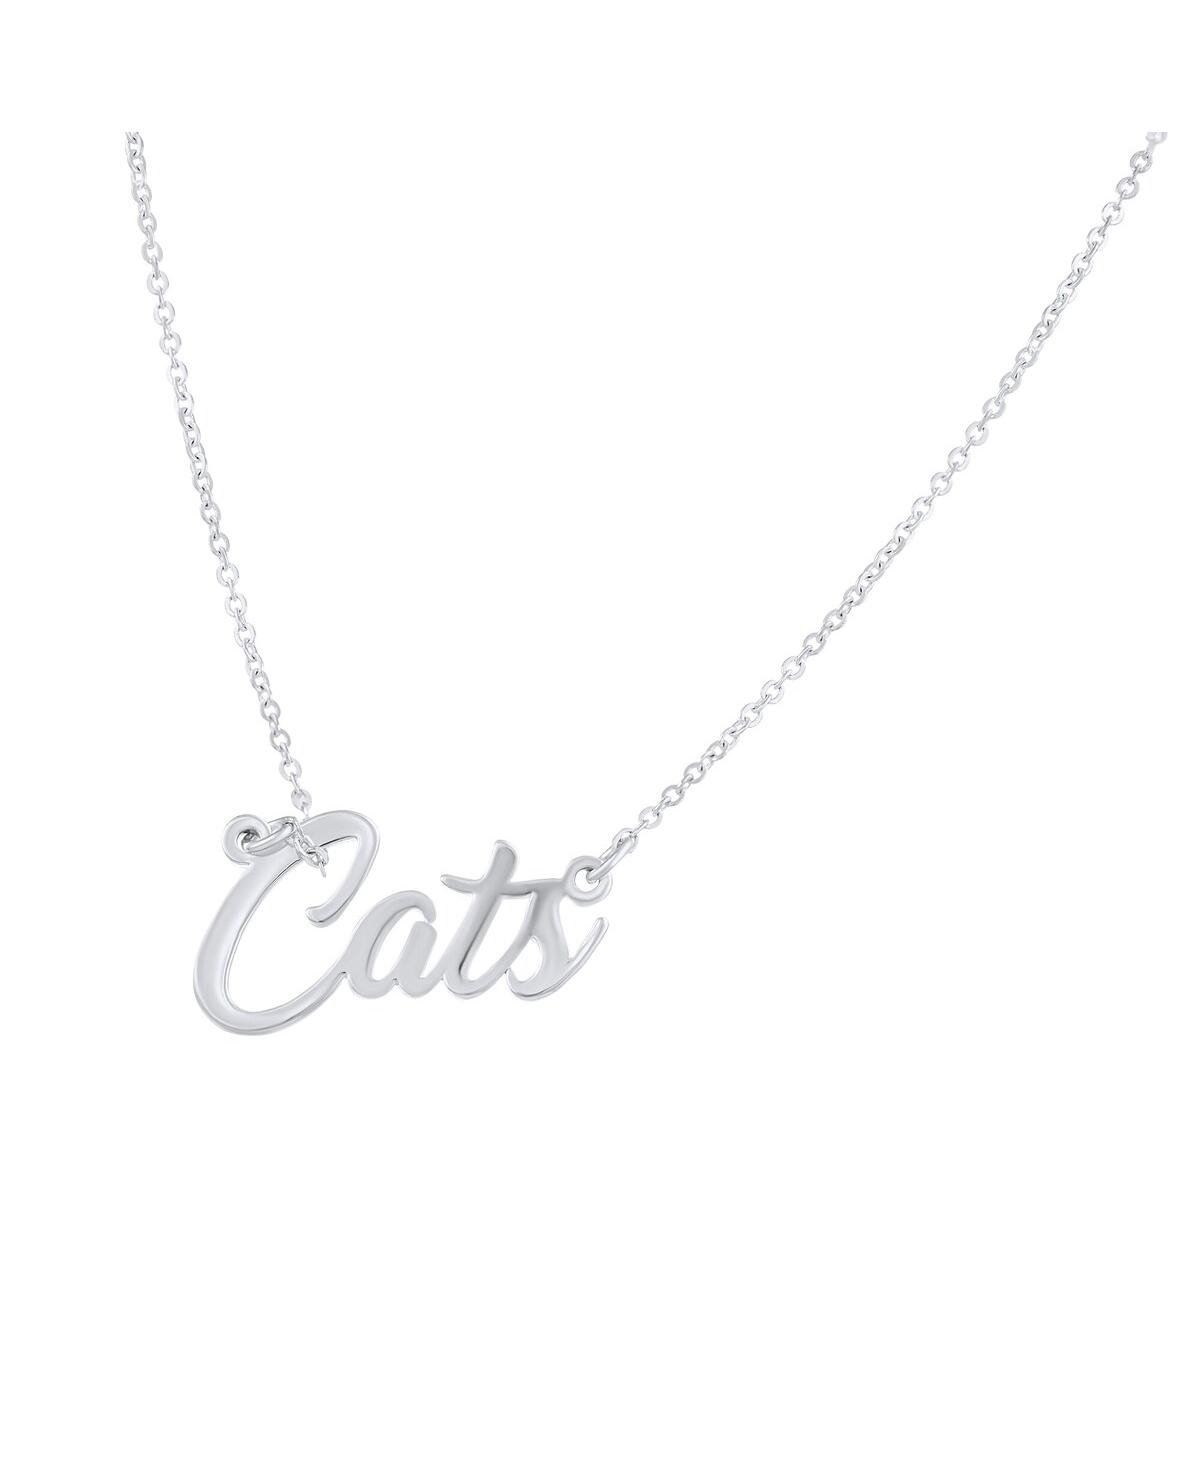 Emerson Street Clothing Co. Women's Kentucky Wildcats Brielle Necklace In Silver-tone